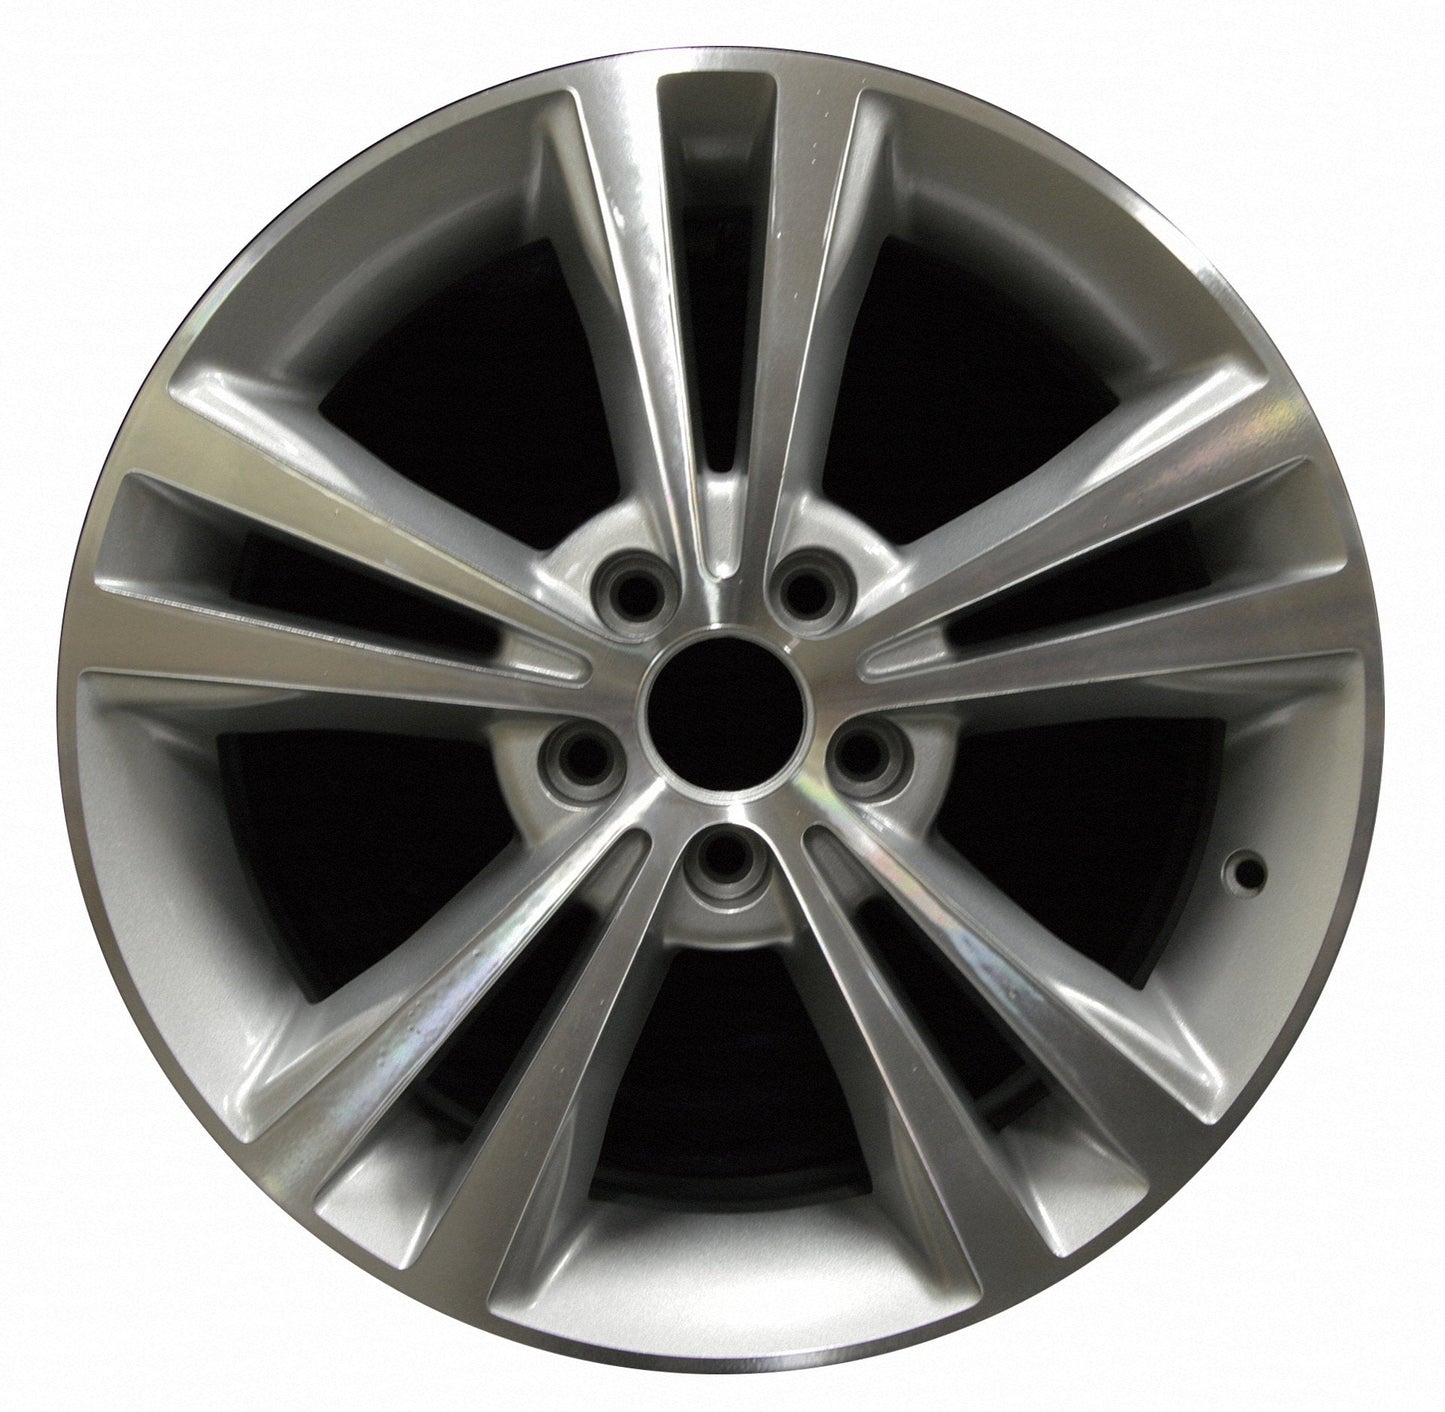 Lincoln MKS  2009, 2010, 2011, 2012 Factory OEM Car Wheel Size 18x7.5 Alloy WAO.3765.PS02.MA